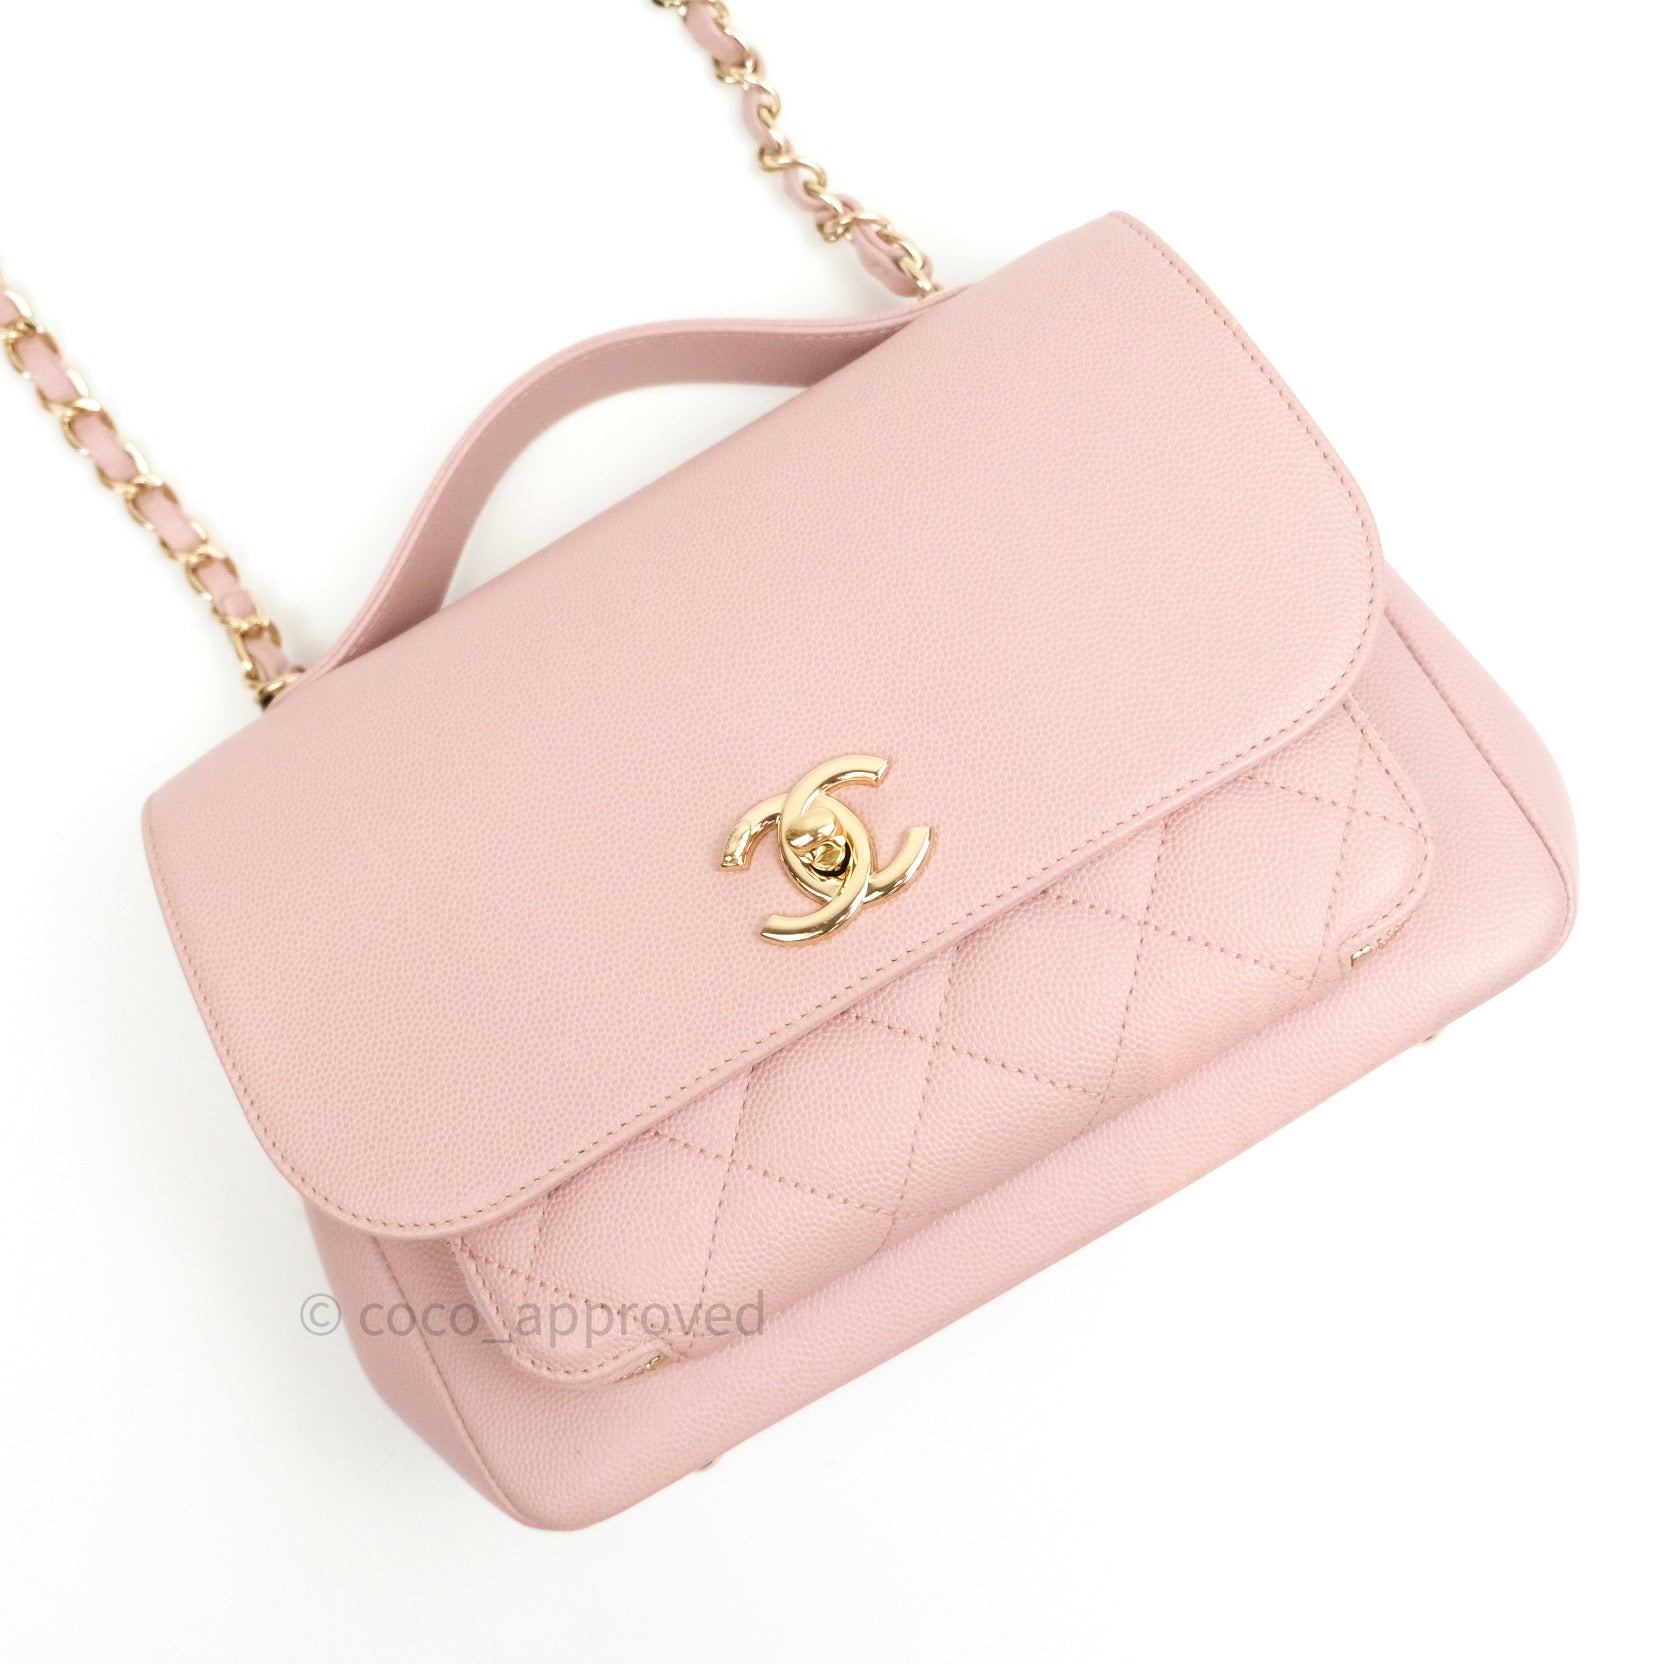 Chanel Business Affinity Small, 22P Pink, Light Gold Hardware